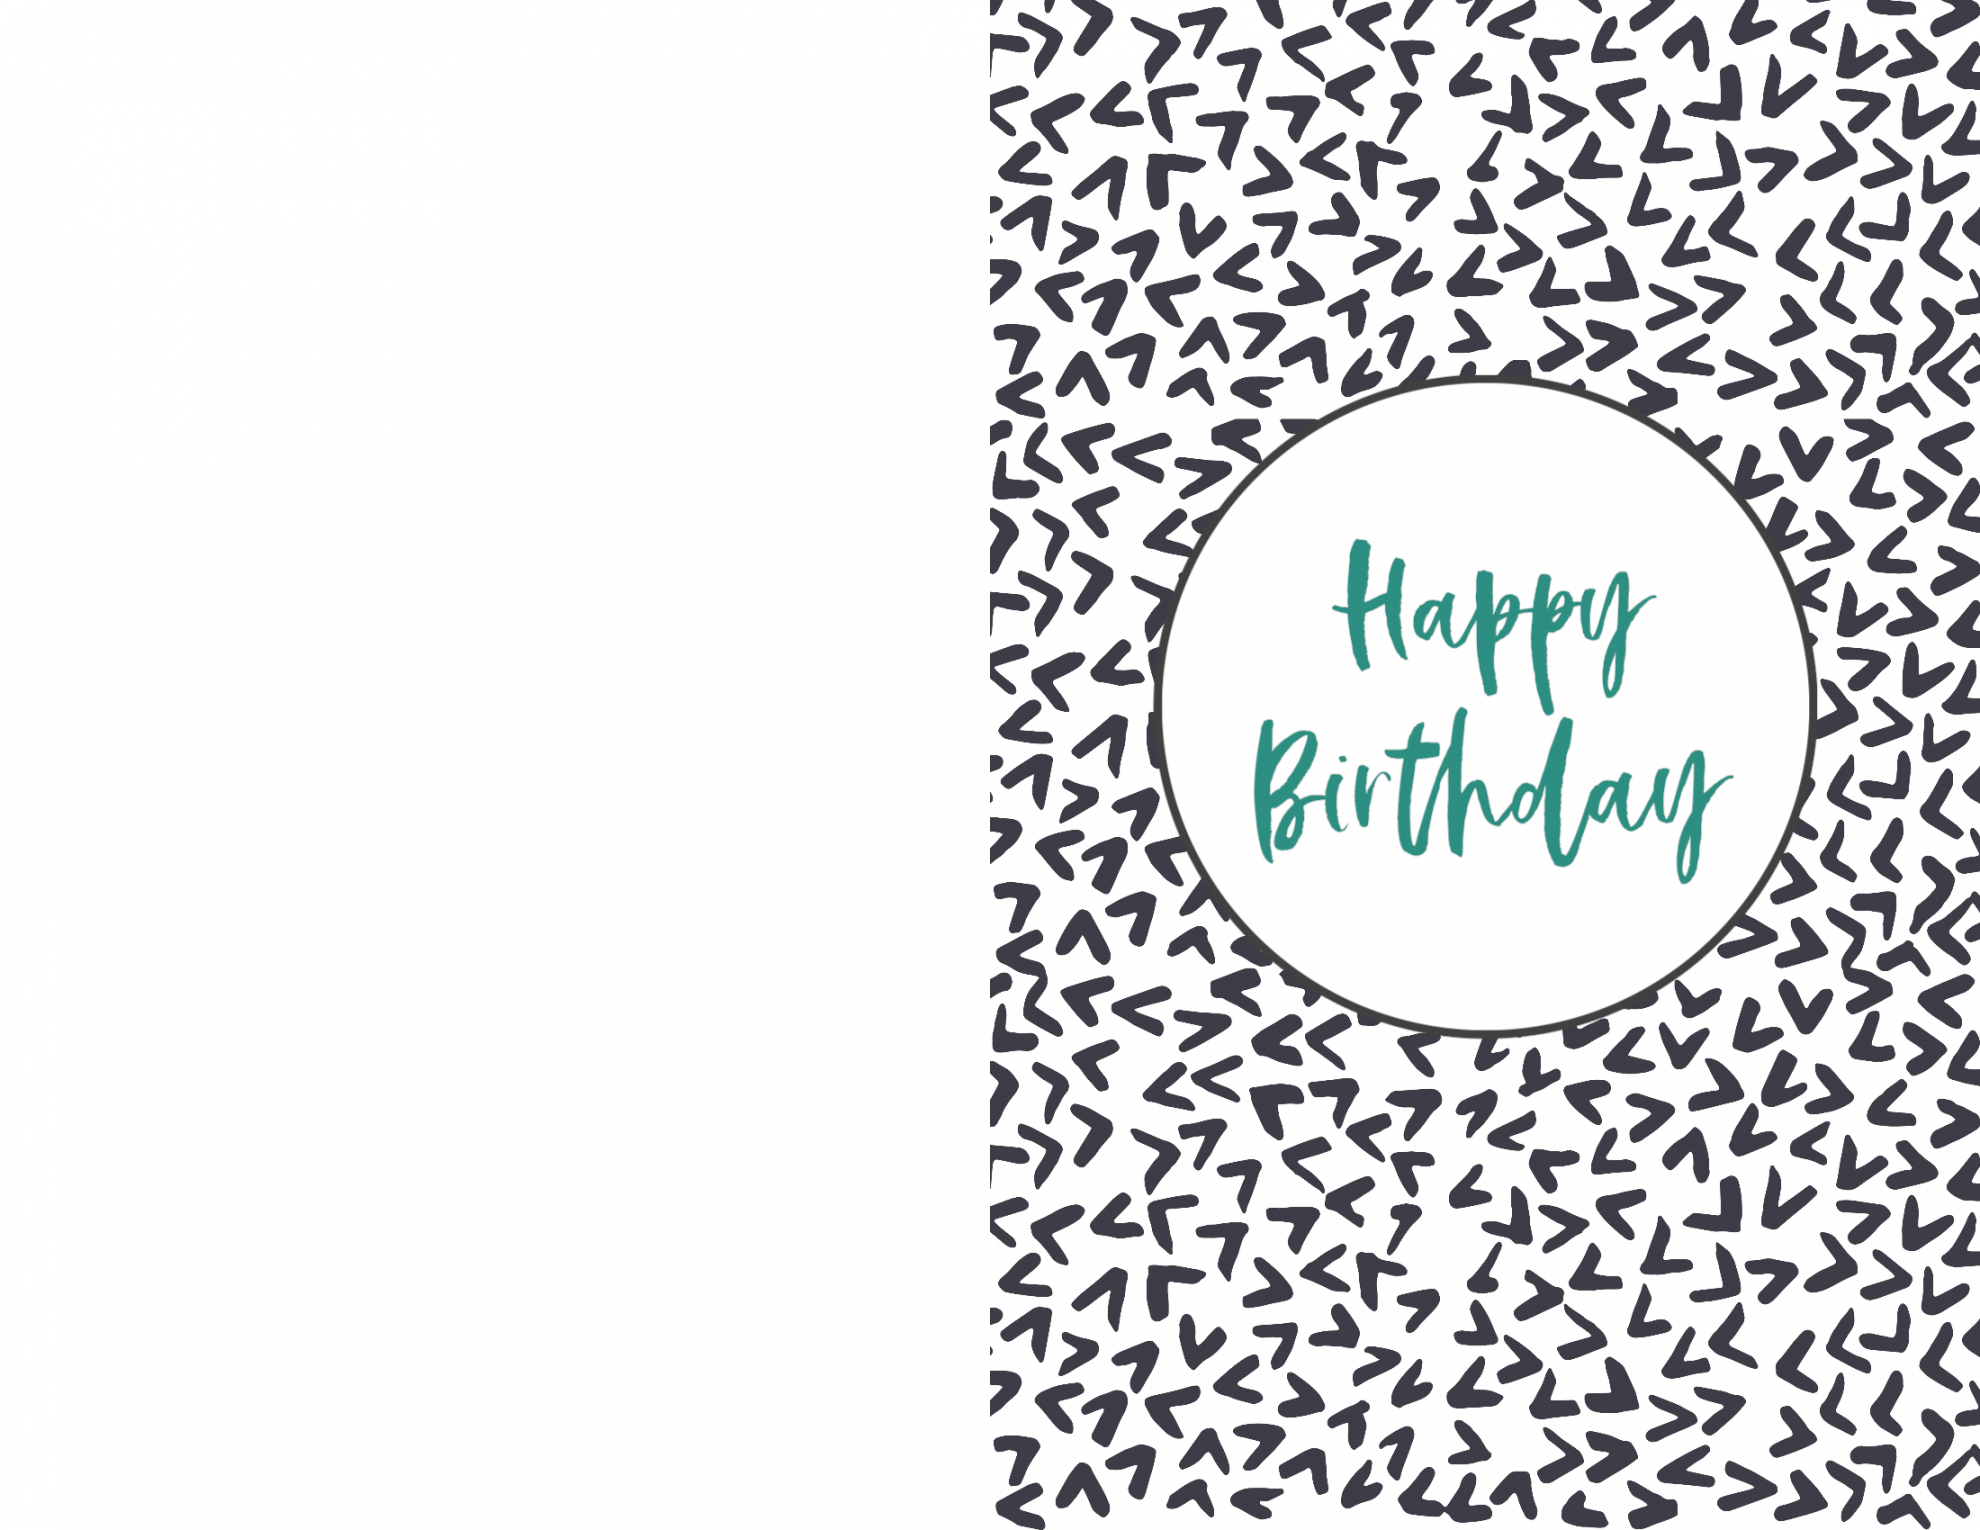 Free Printable Birthday Cards For Adults - Printable - Free Printable Birthday Cards - Paper Trail Design